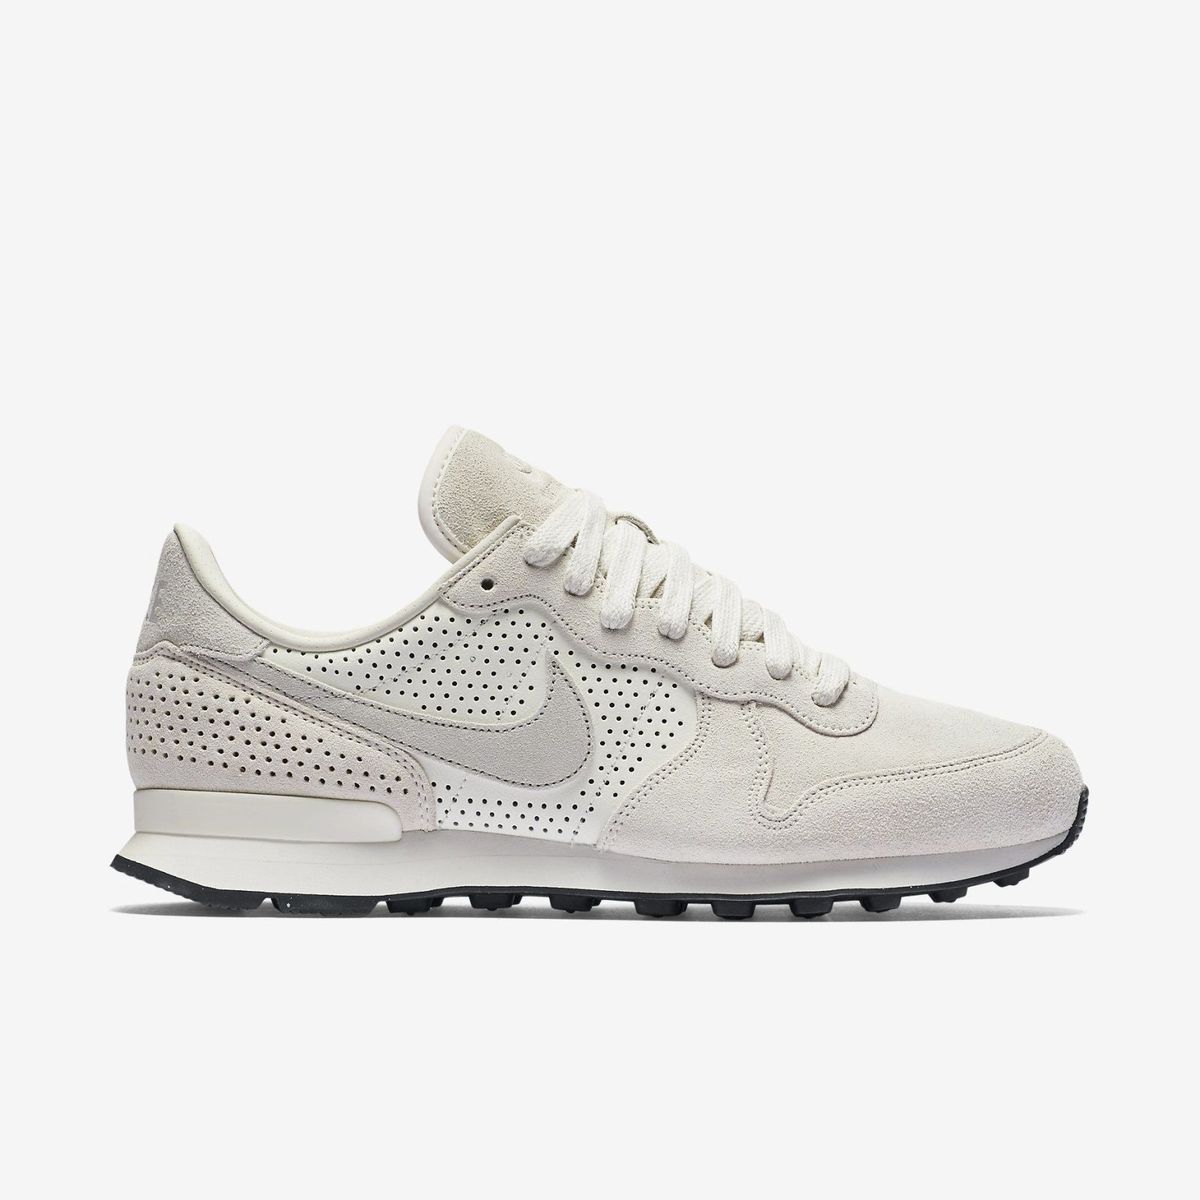 Nike Internationalist 'Luxe'- Classic Nike Shoes Upgraded